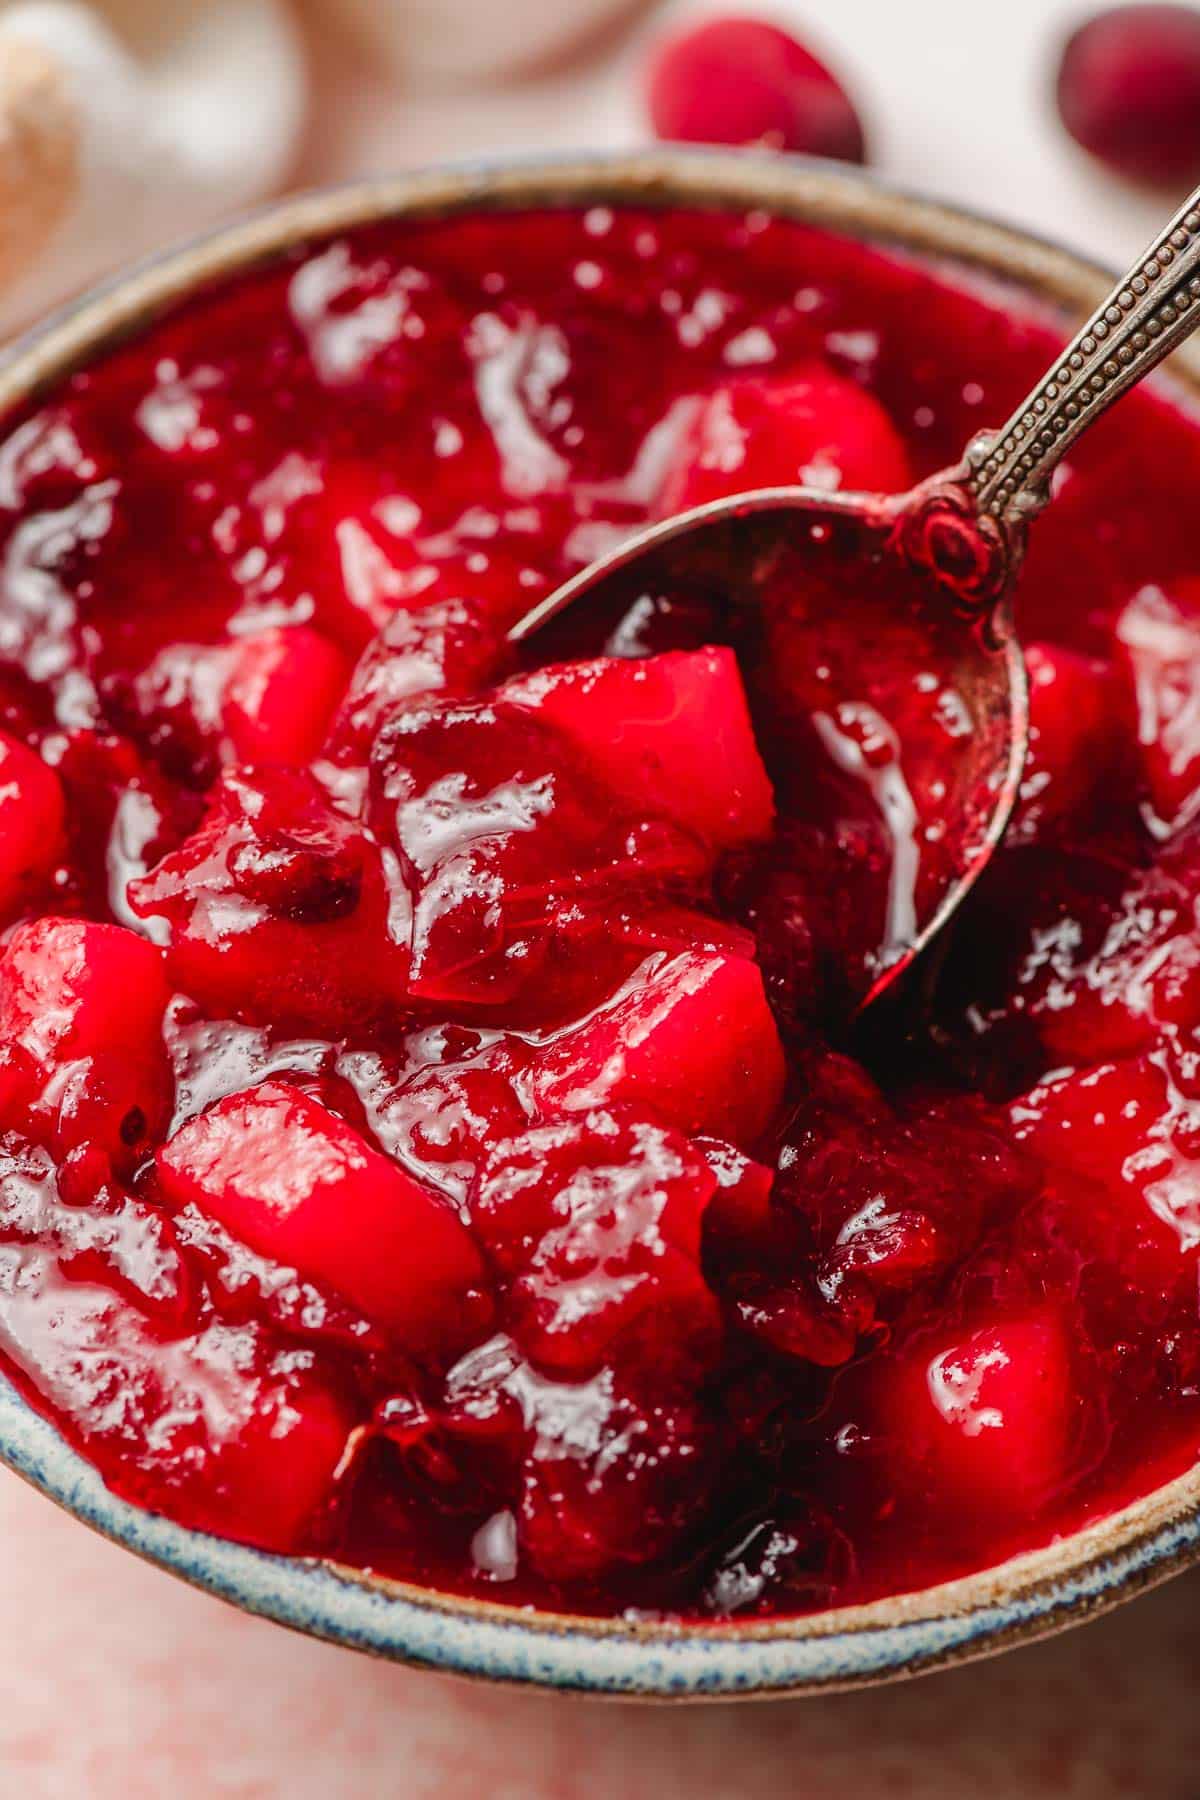 Wooden spoon scooping up ruby red cranberry pear sauce from a bowl.